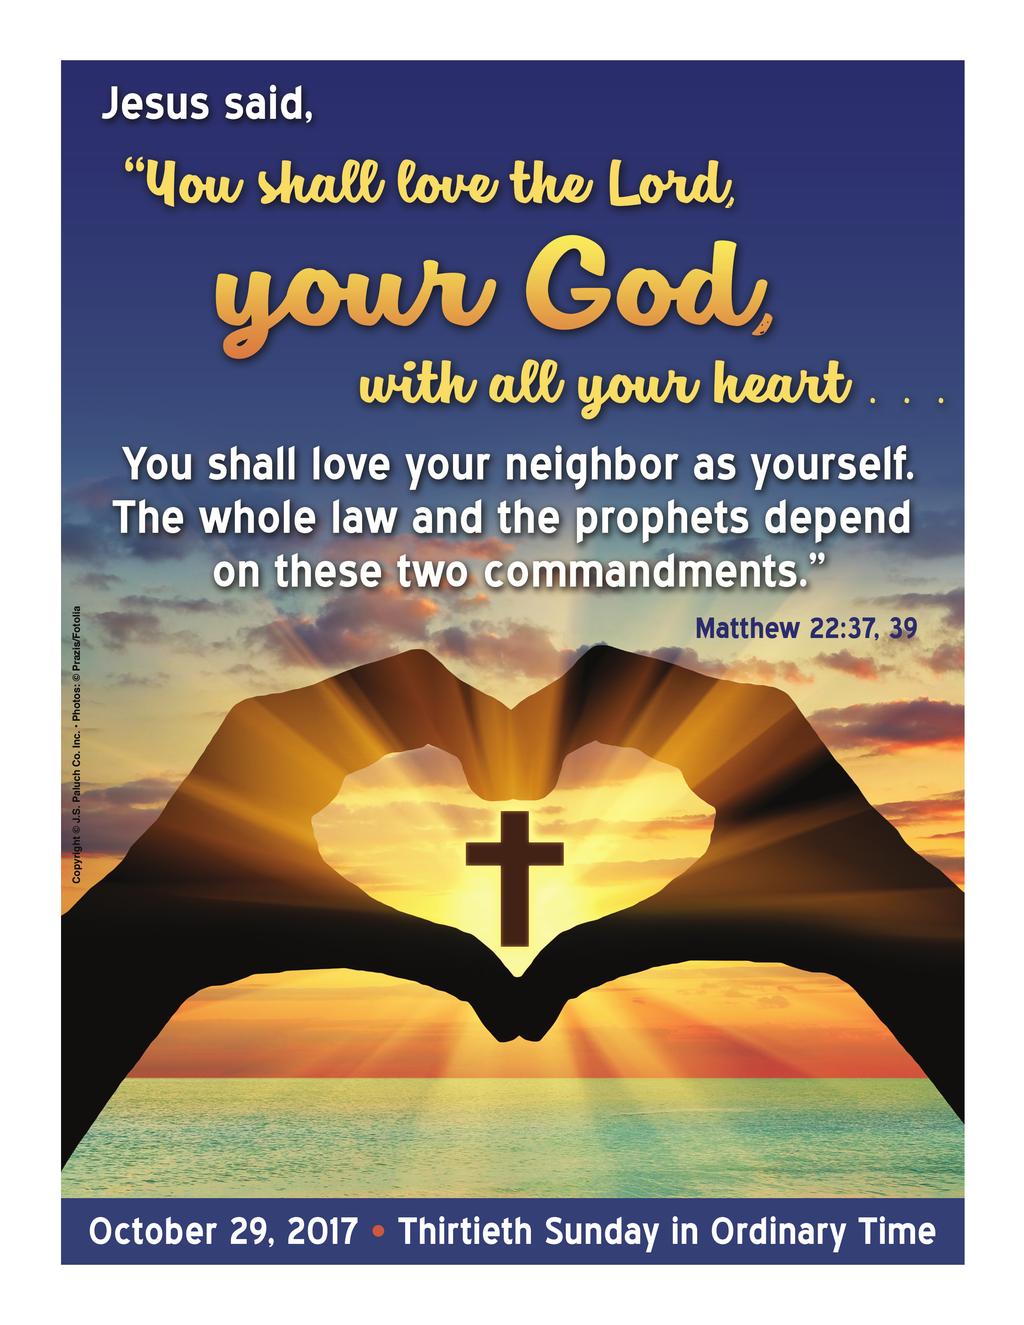 THE GREAT RIVER ROAD MESSENGER BALANCE Today's scriptures emphasize the fundamental link between love of God and love of our neighbors, especially those who are most in need.